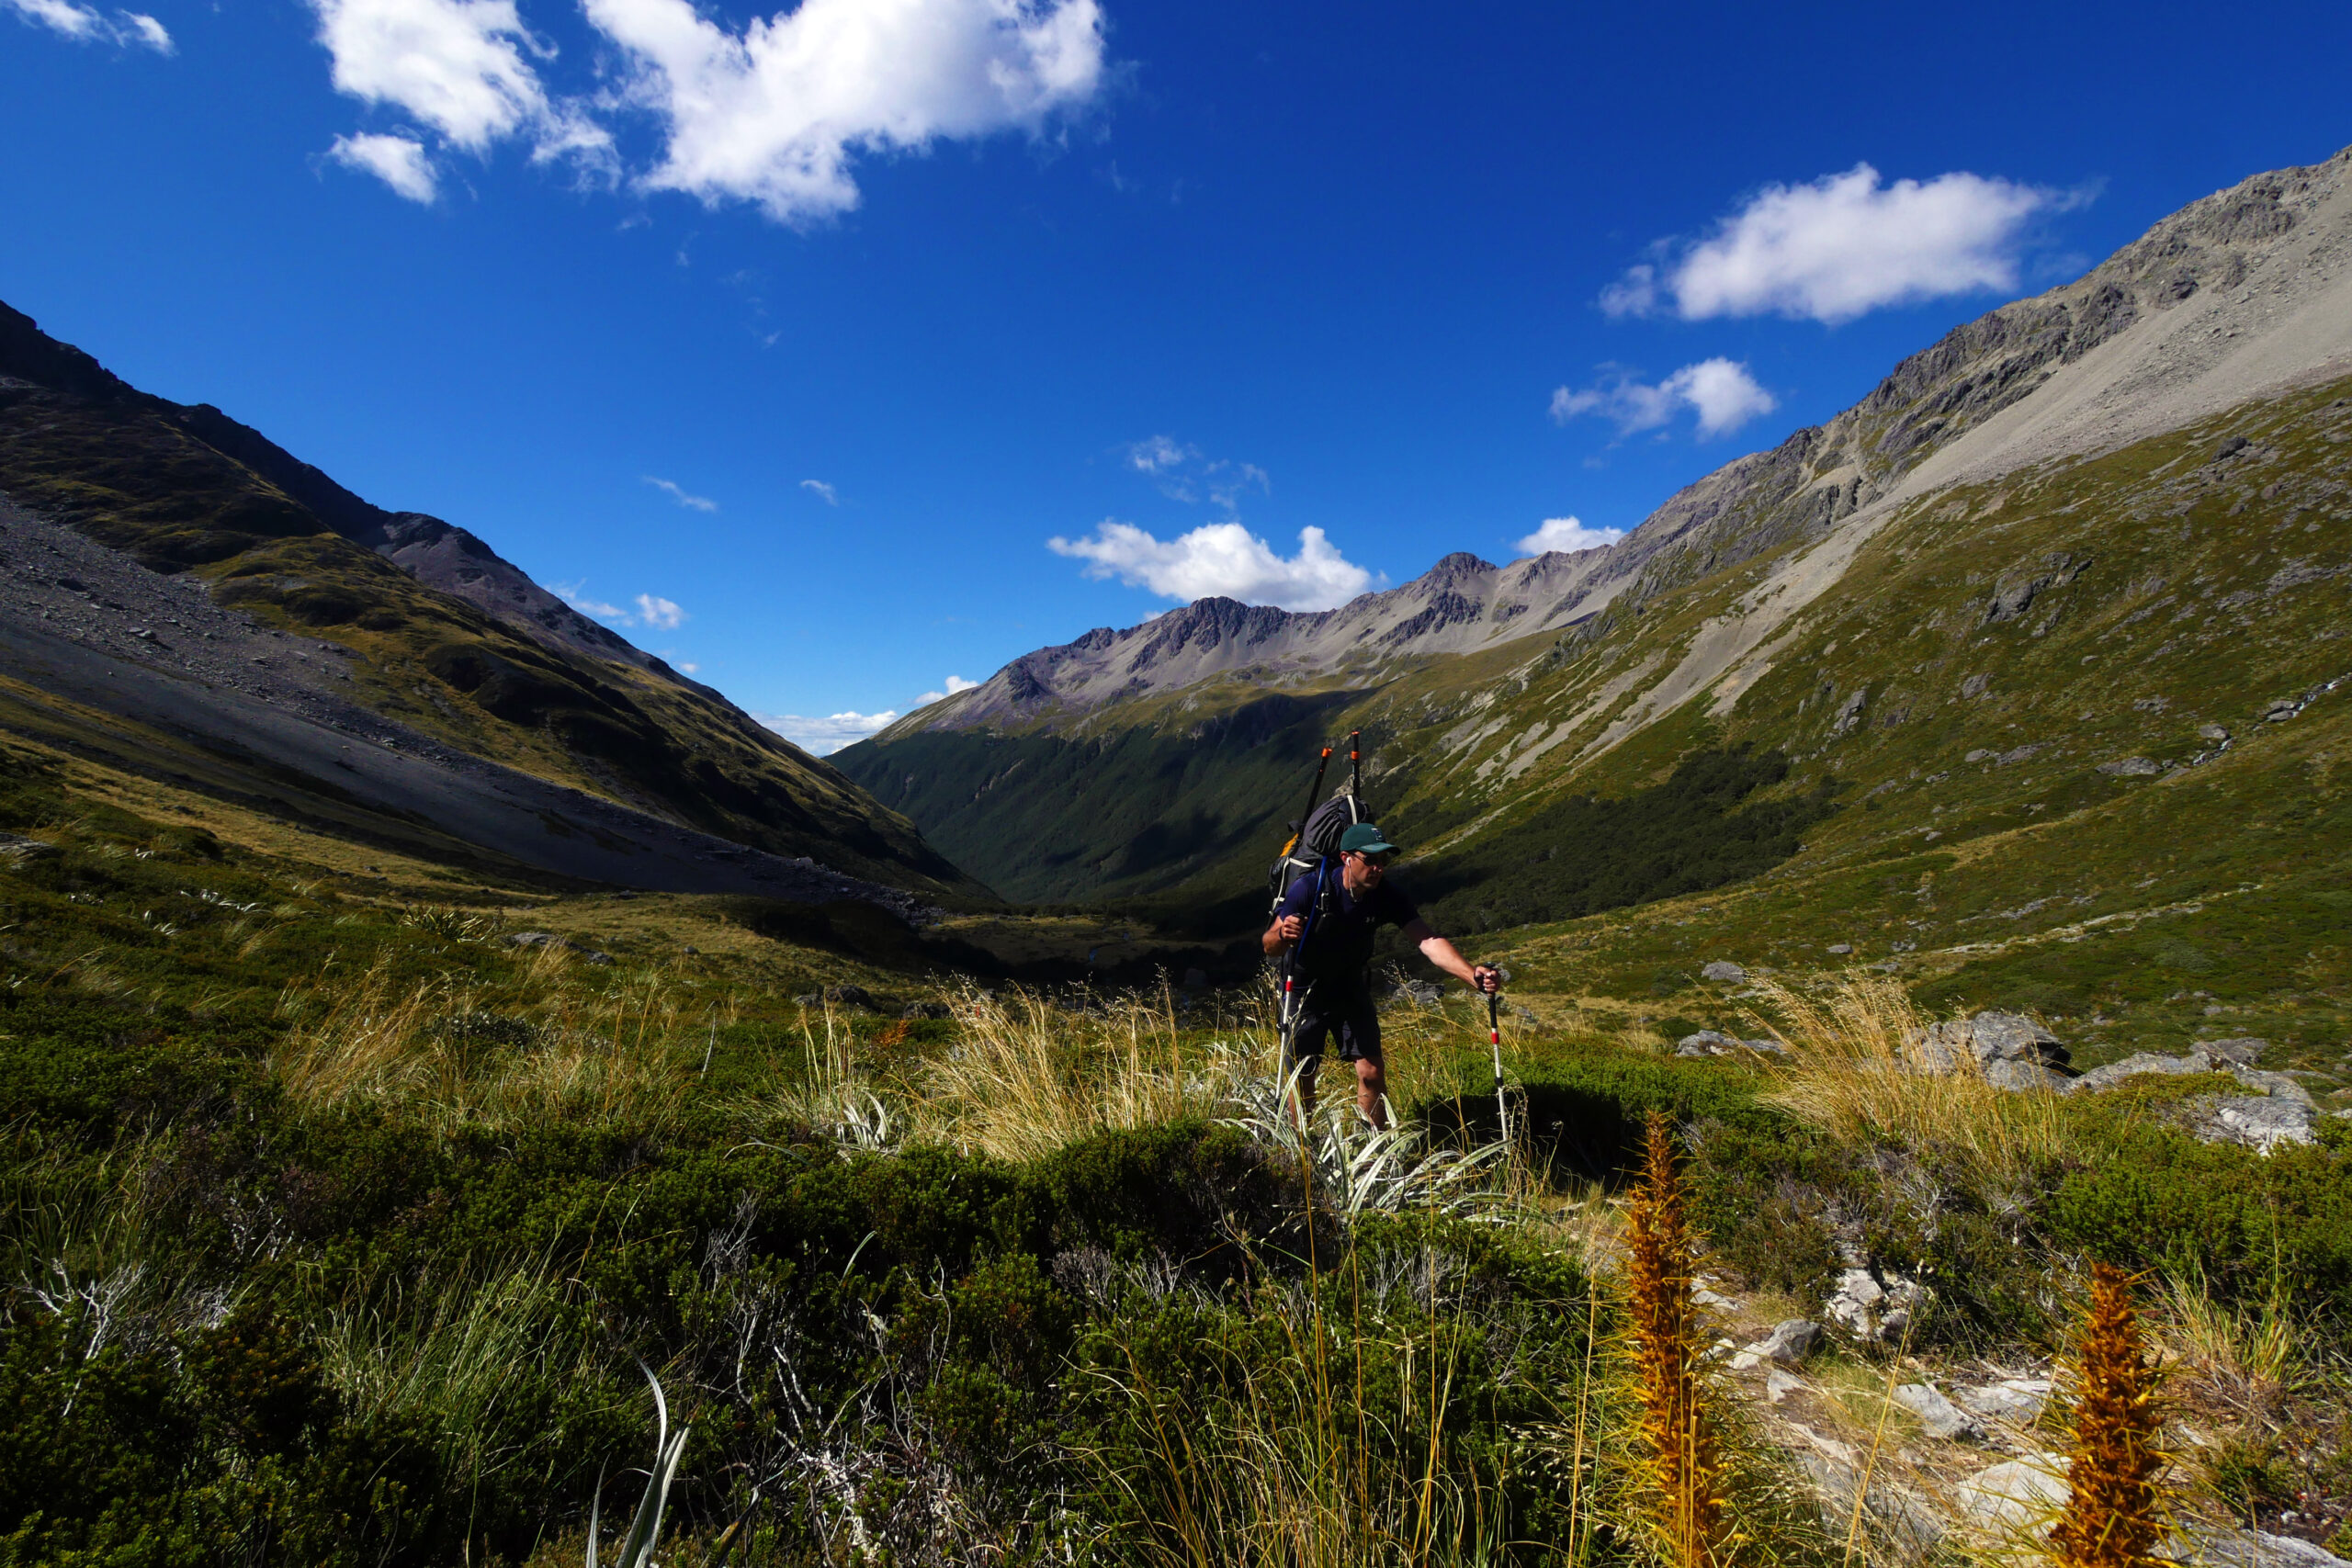 Hiking up Travers Saddle is just a warmup for the challenging climb up Waiau Pass farther down the trail.